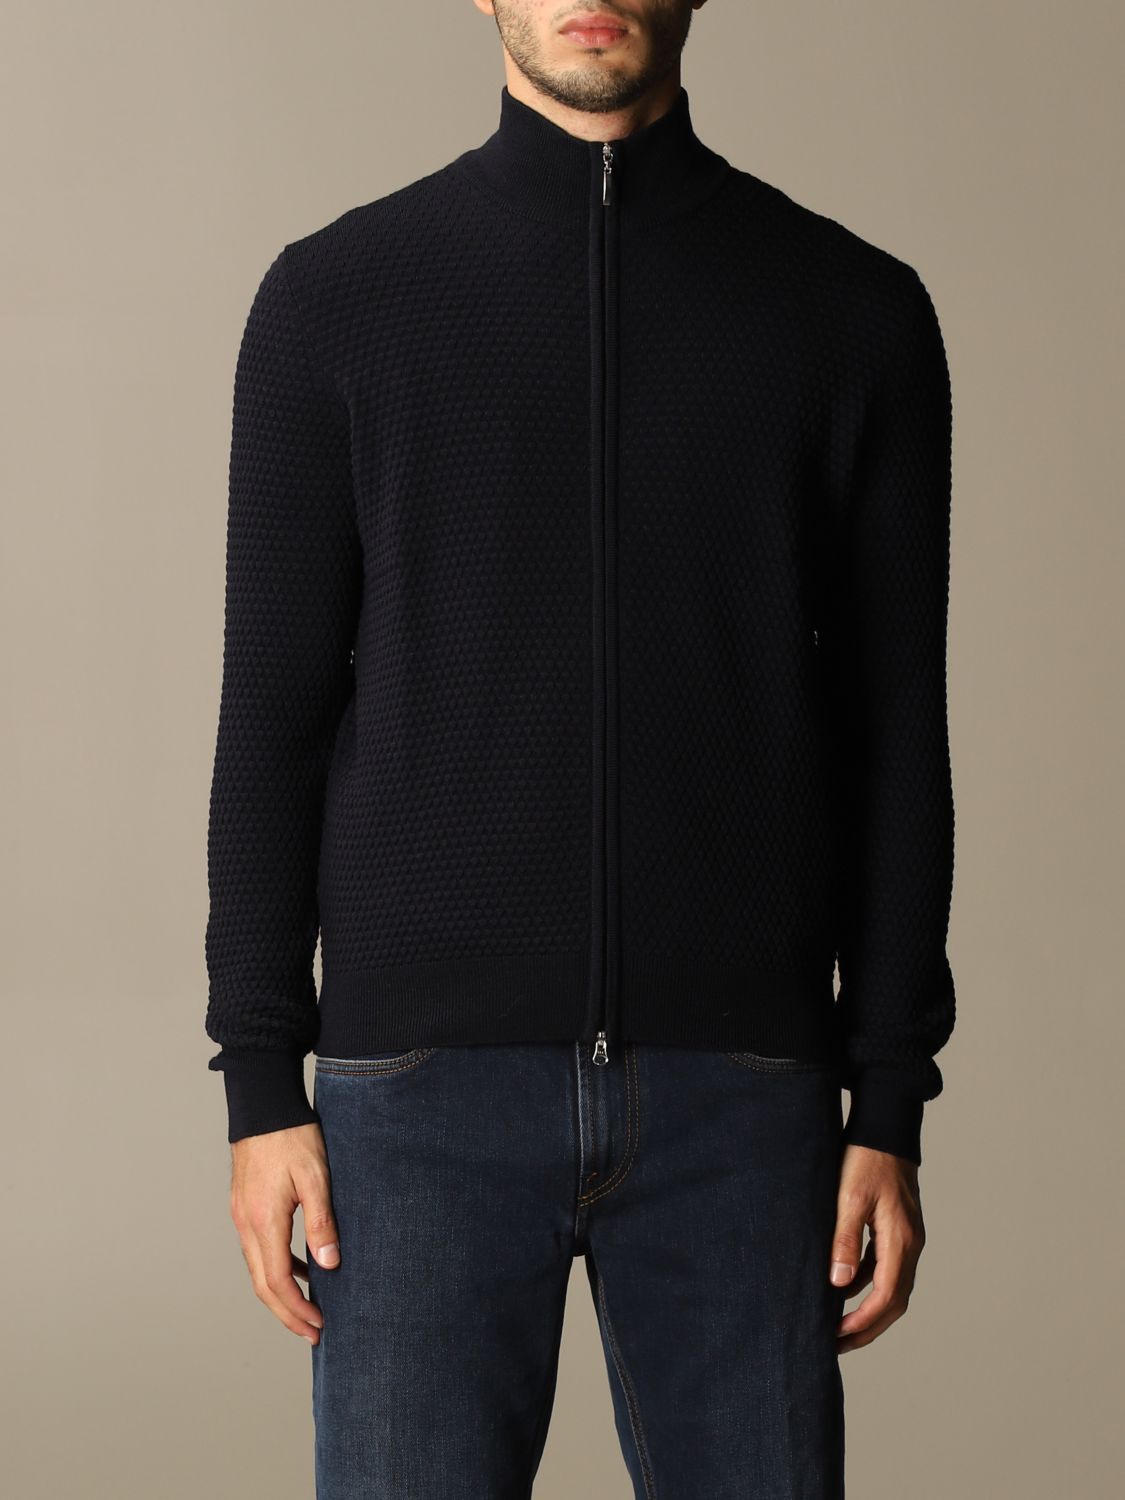 Gran Sasso Outlet: cardigan in wool with zip - Blue | Gran Sasso ...